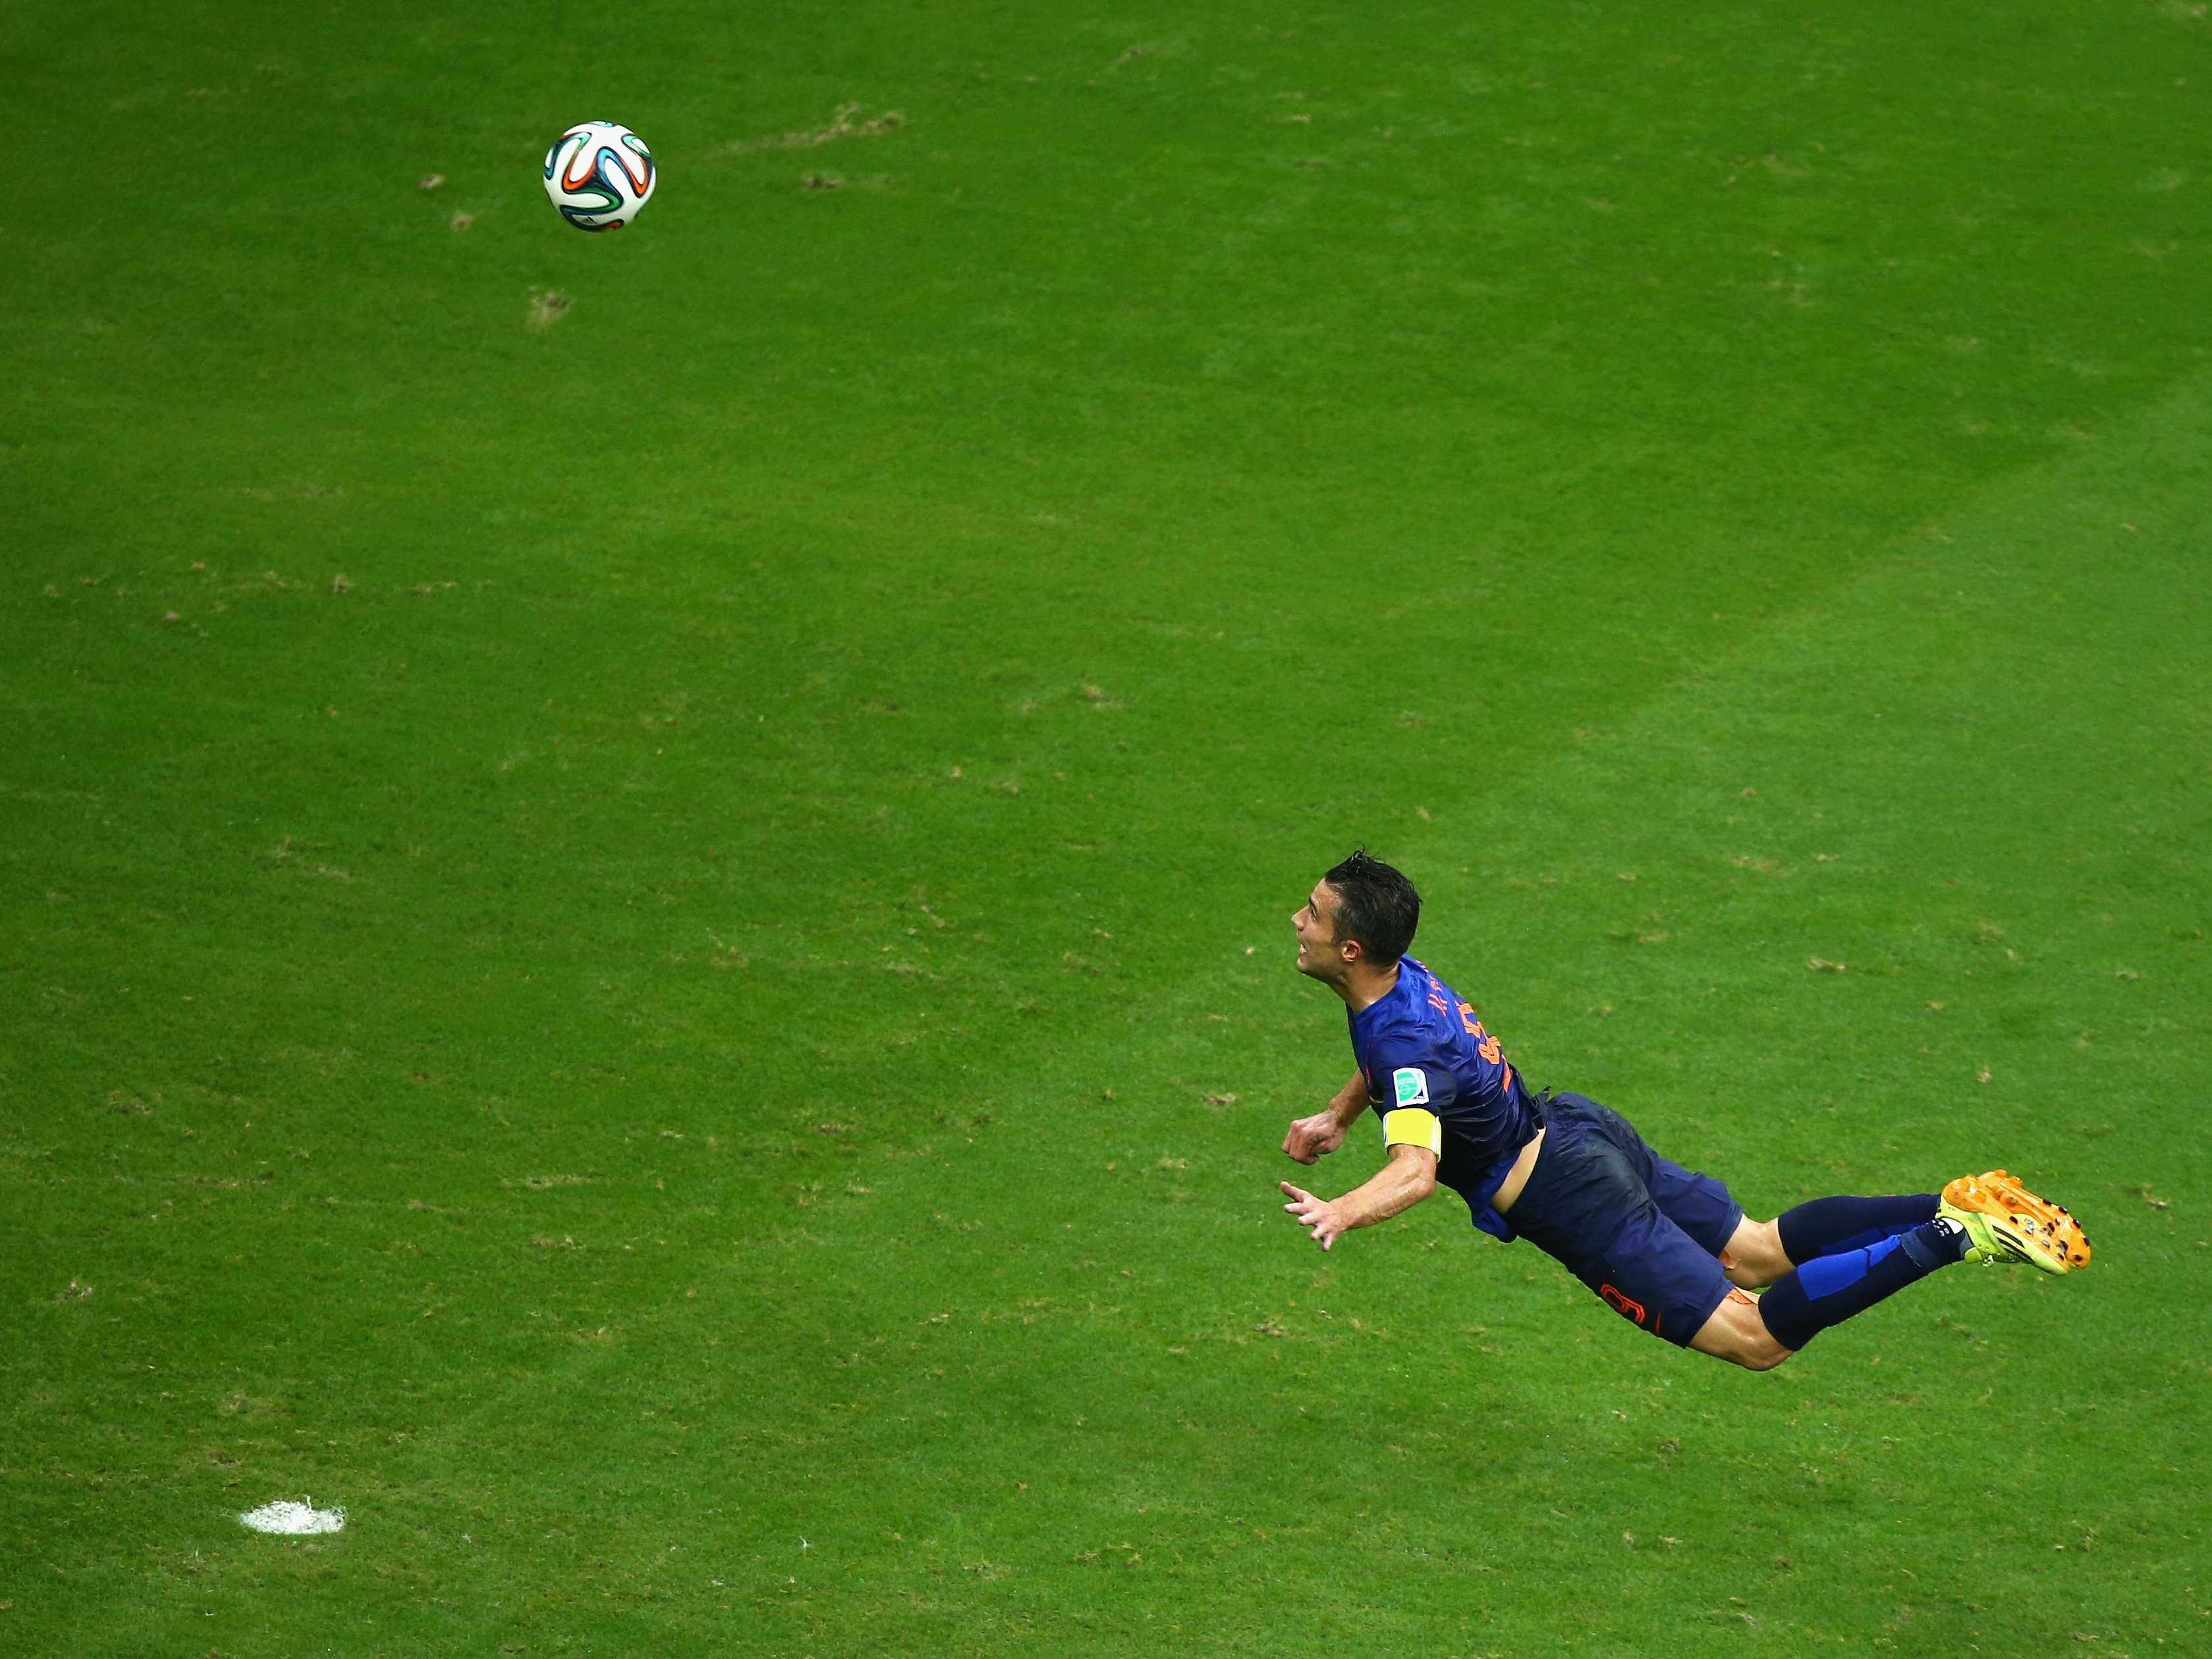 an-instant-classic-photo-of-robin-van-persies-flying-header-goal-at-the-world-cup.jpg